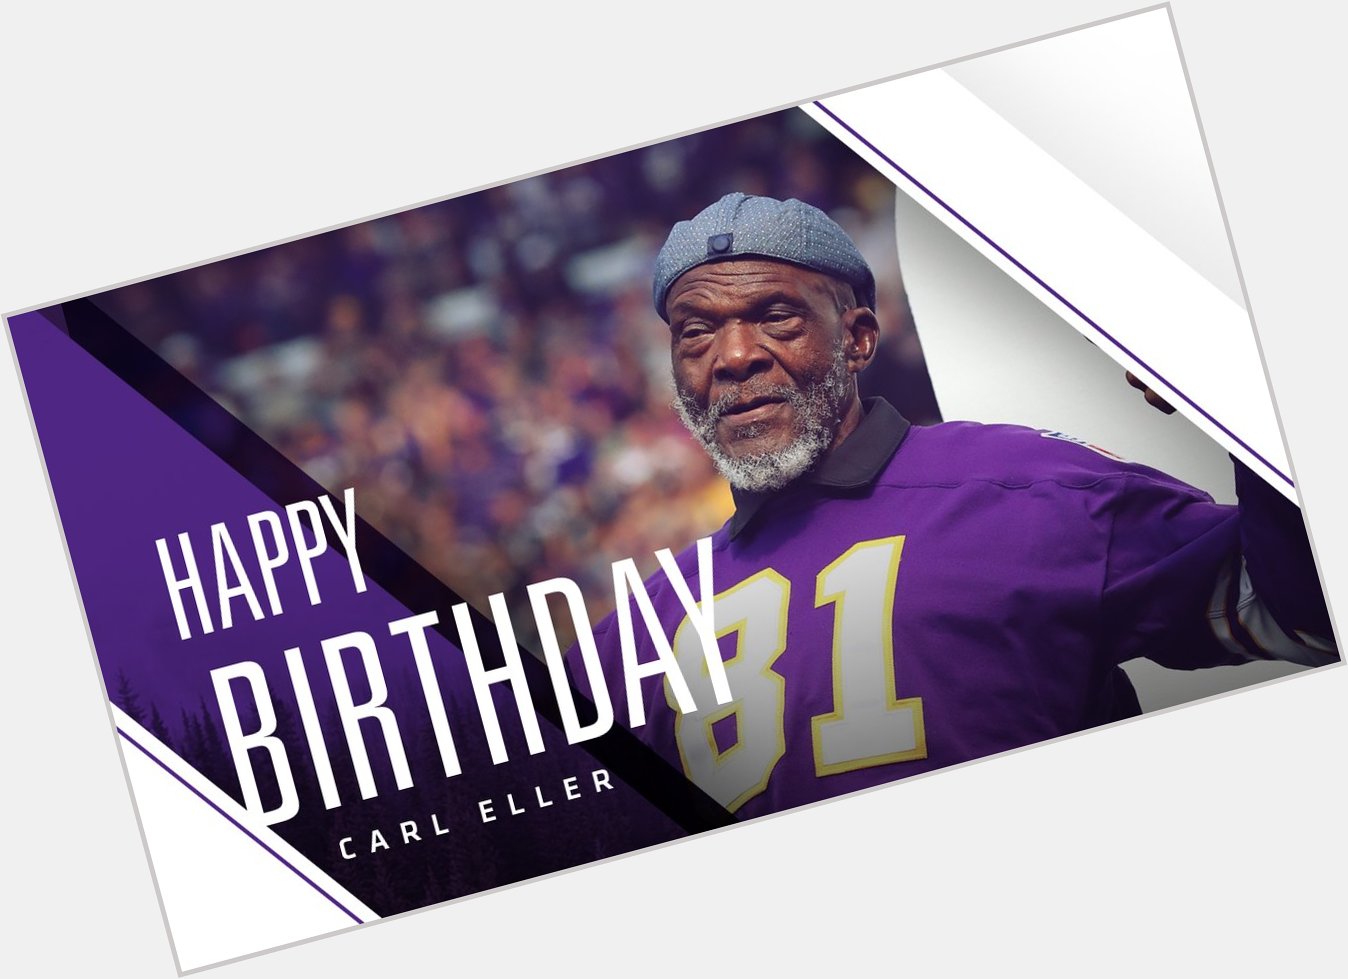 Happy birthday to one of our favourite Purple People Eaters - Carl Eller! 